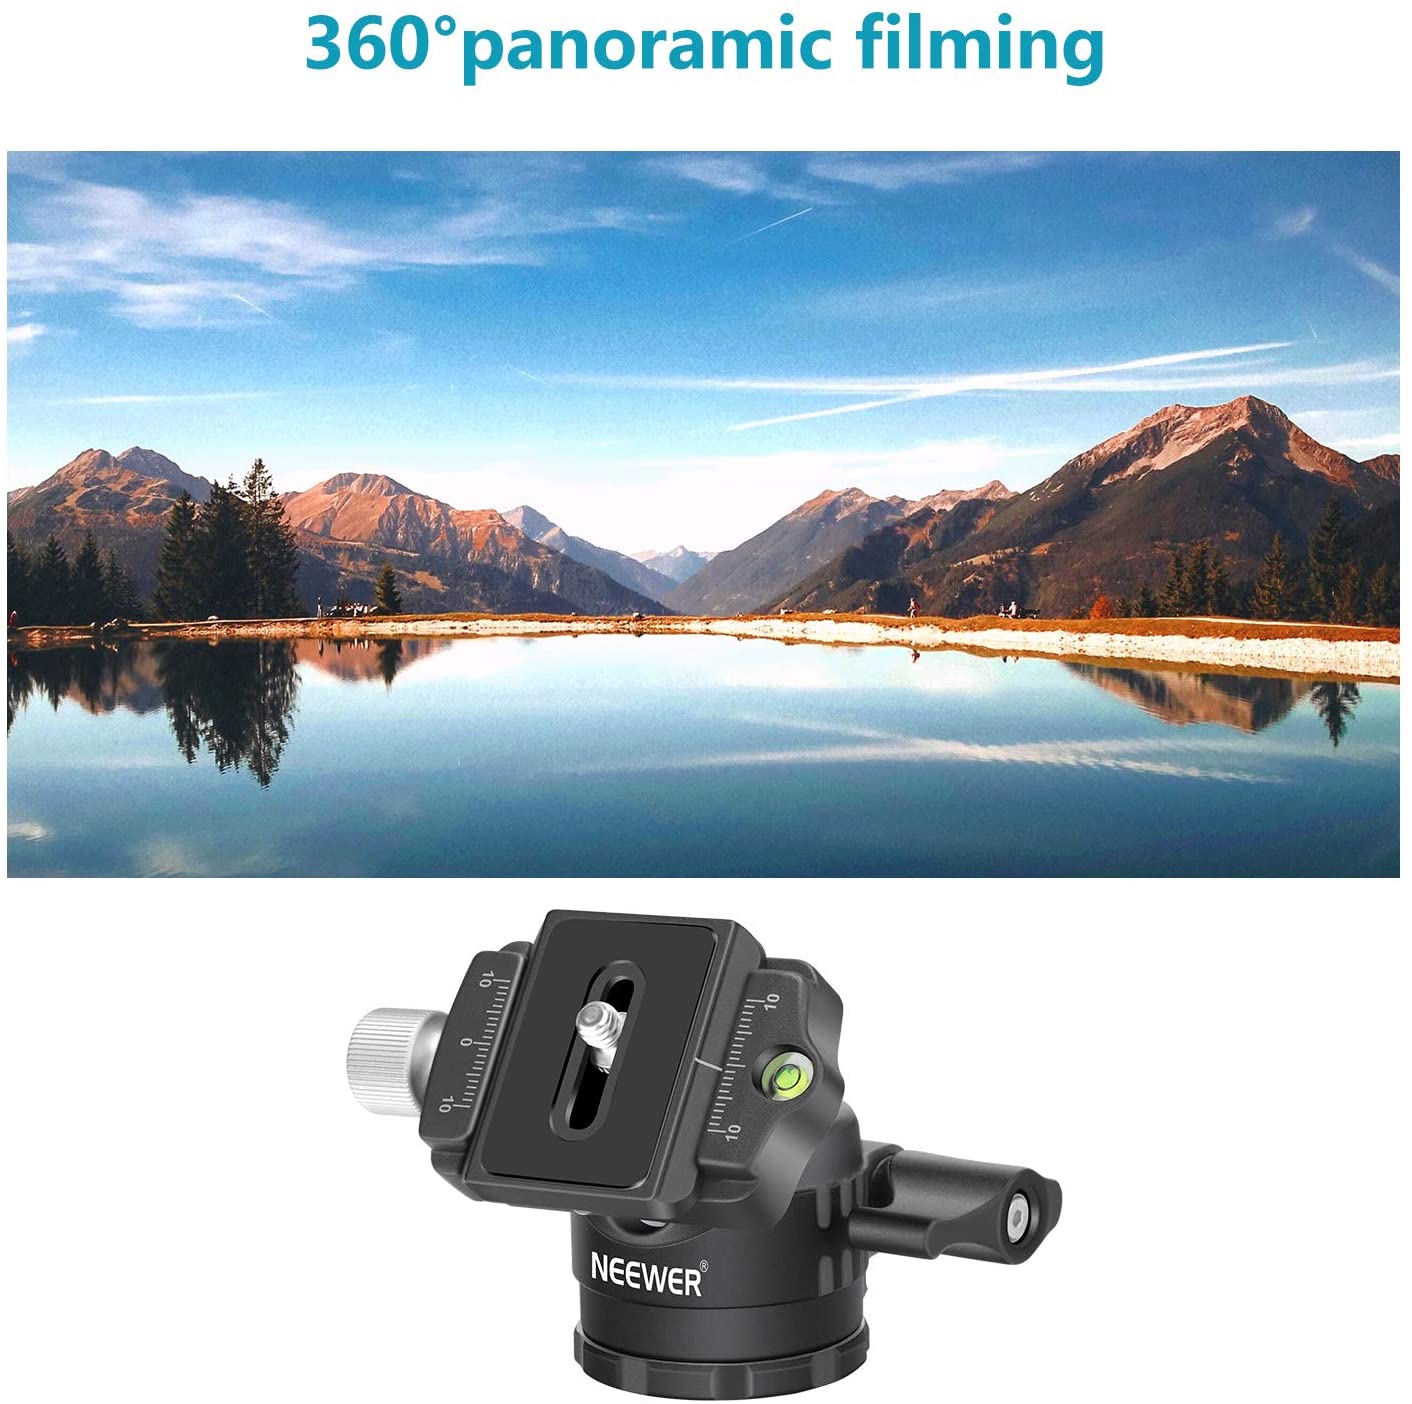 1/4 inch QR Plate and Bubble Level for DSLR Cameras Tripods Monopods Slider Max Load 22lbs/10kg Neewer Professional 28MM Low-Profile Tripod Ball Head 360 Degree Panoramic Rotating with 2 Lock knobs 